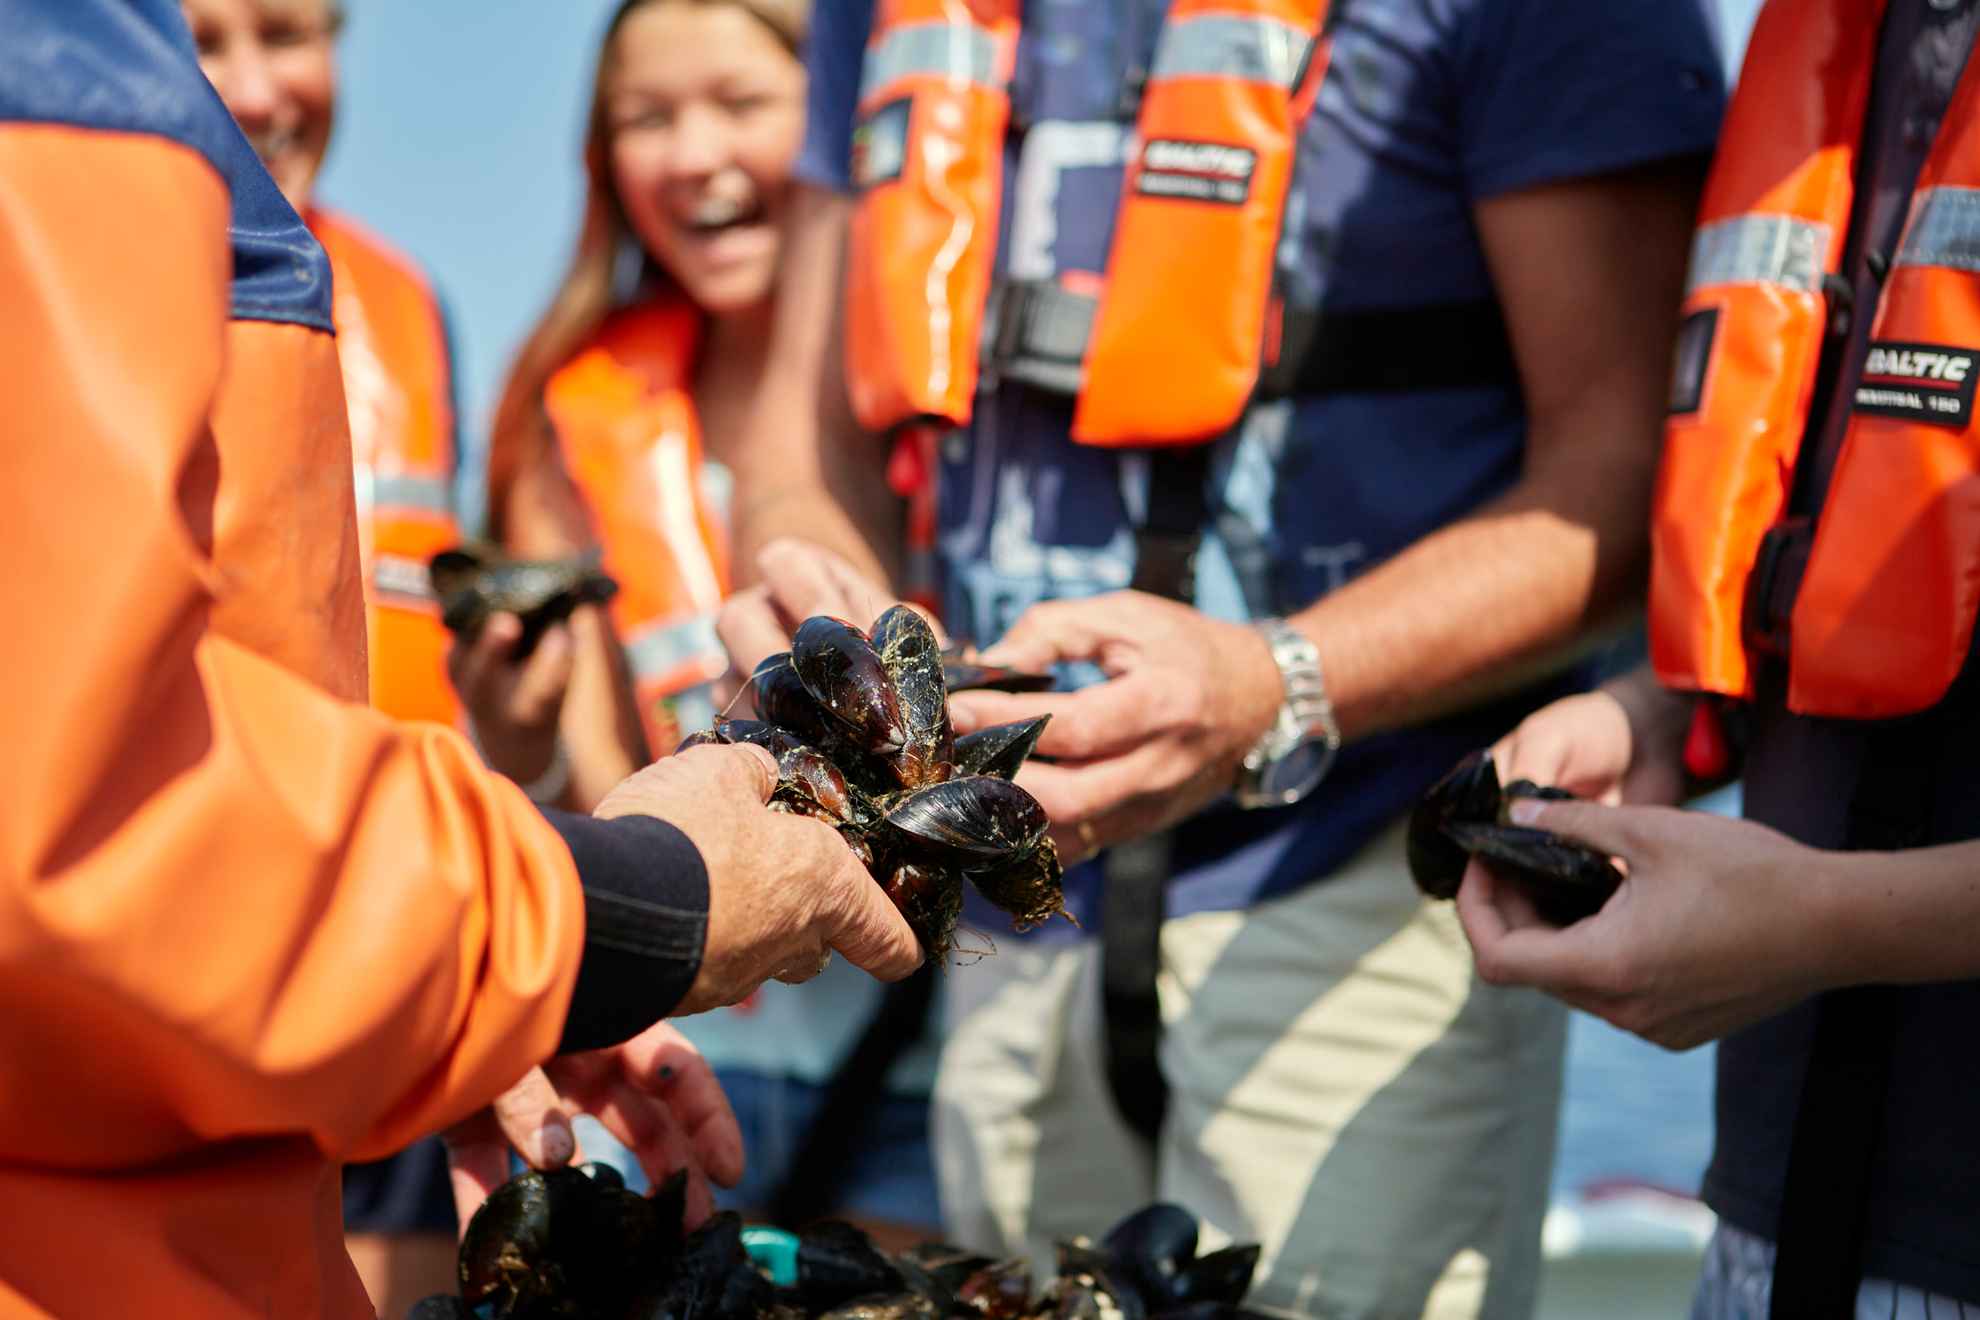 A group of people hold freshly caught mussels.